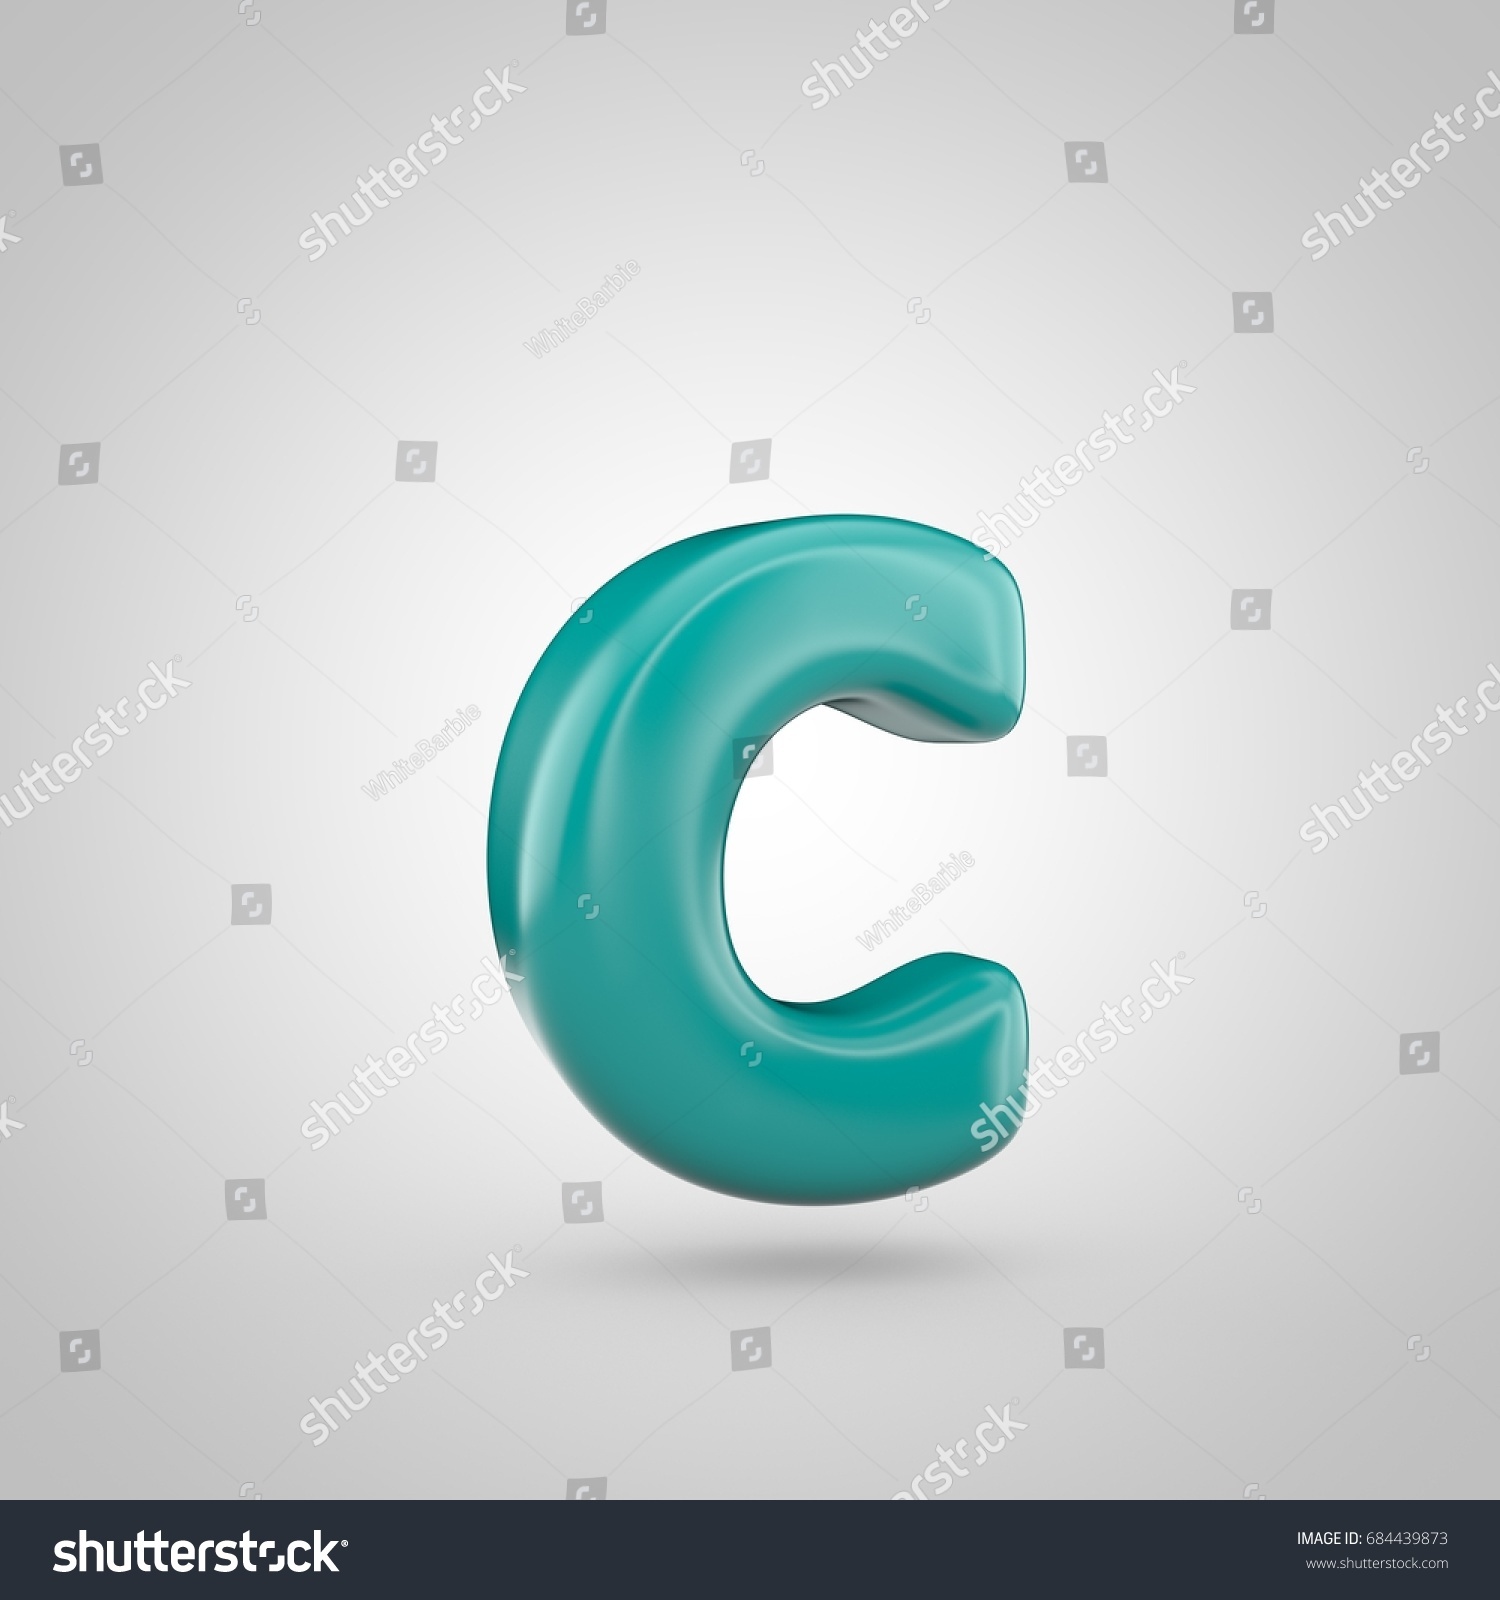 Glossy Marrs Green Color Alphabet Letter C Lowercase 3d Render Of